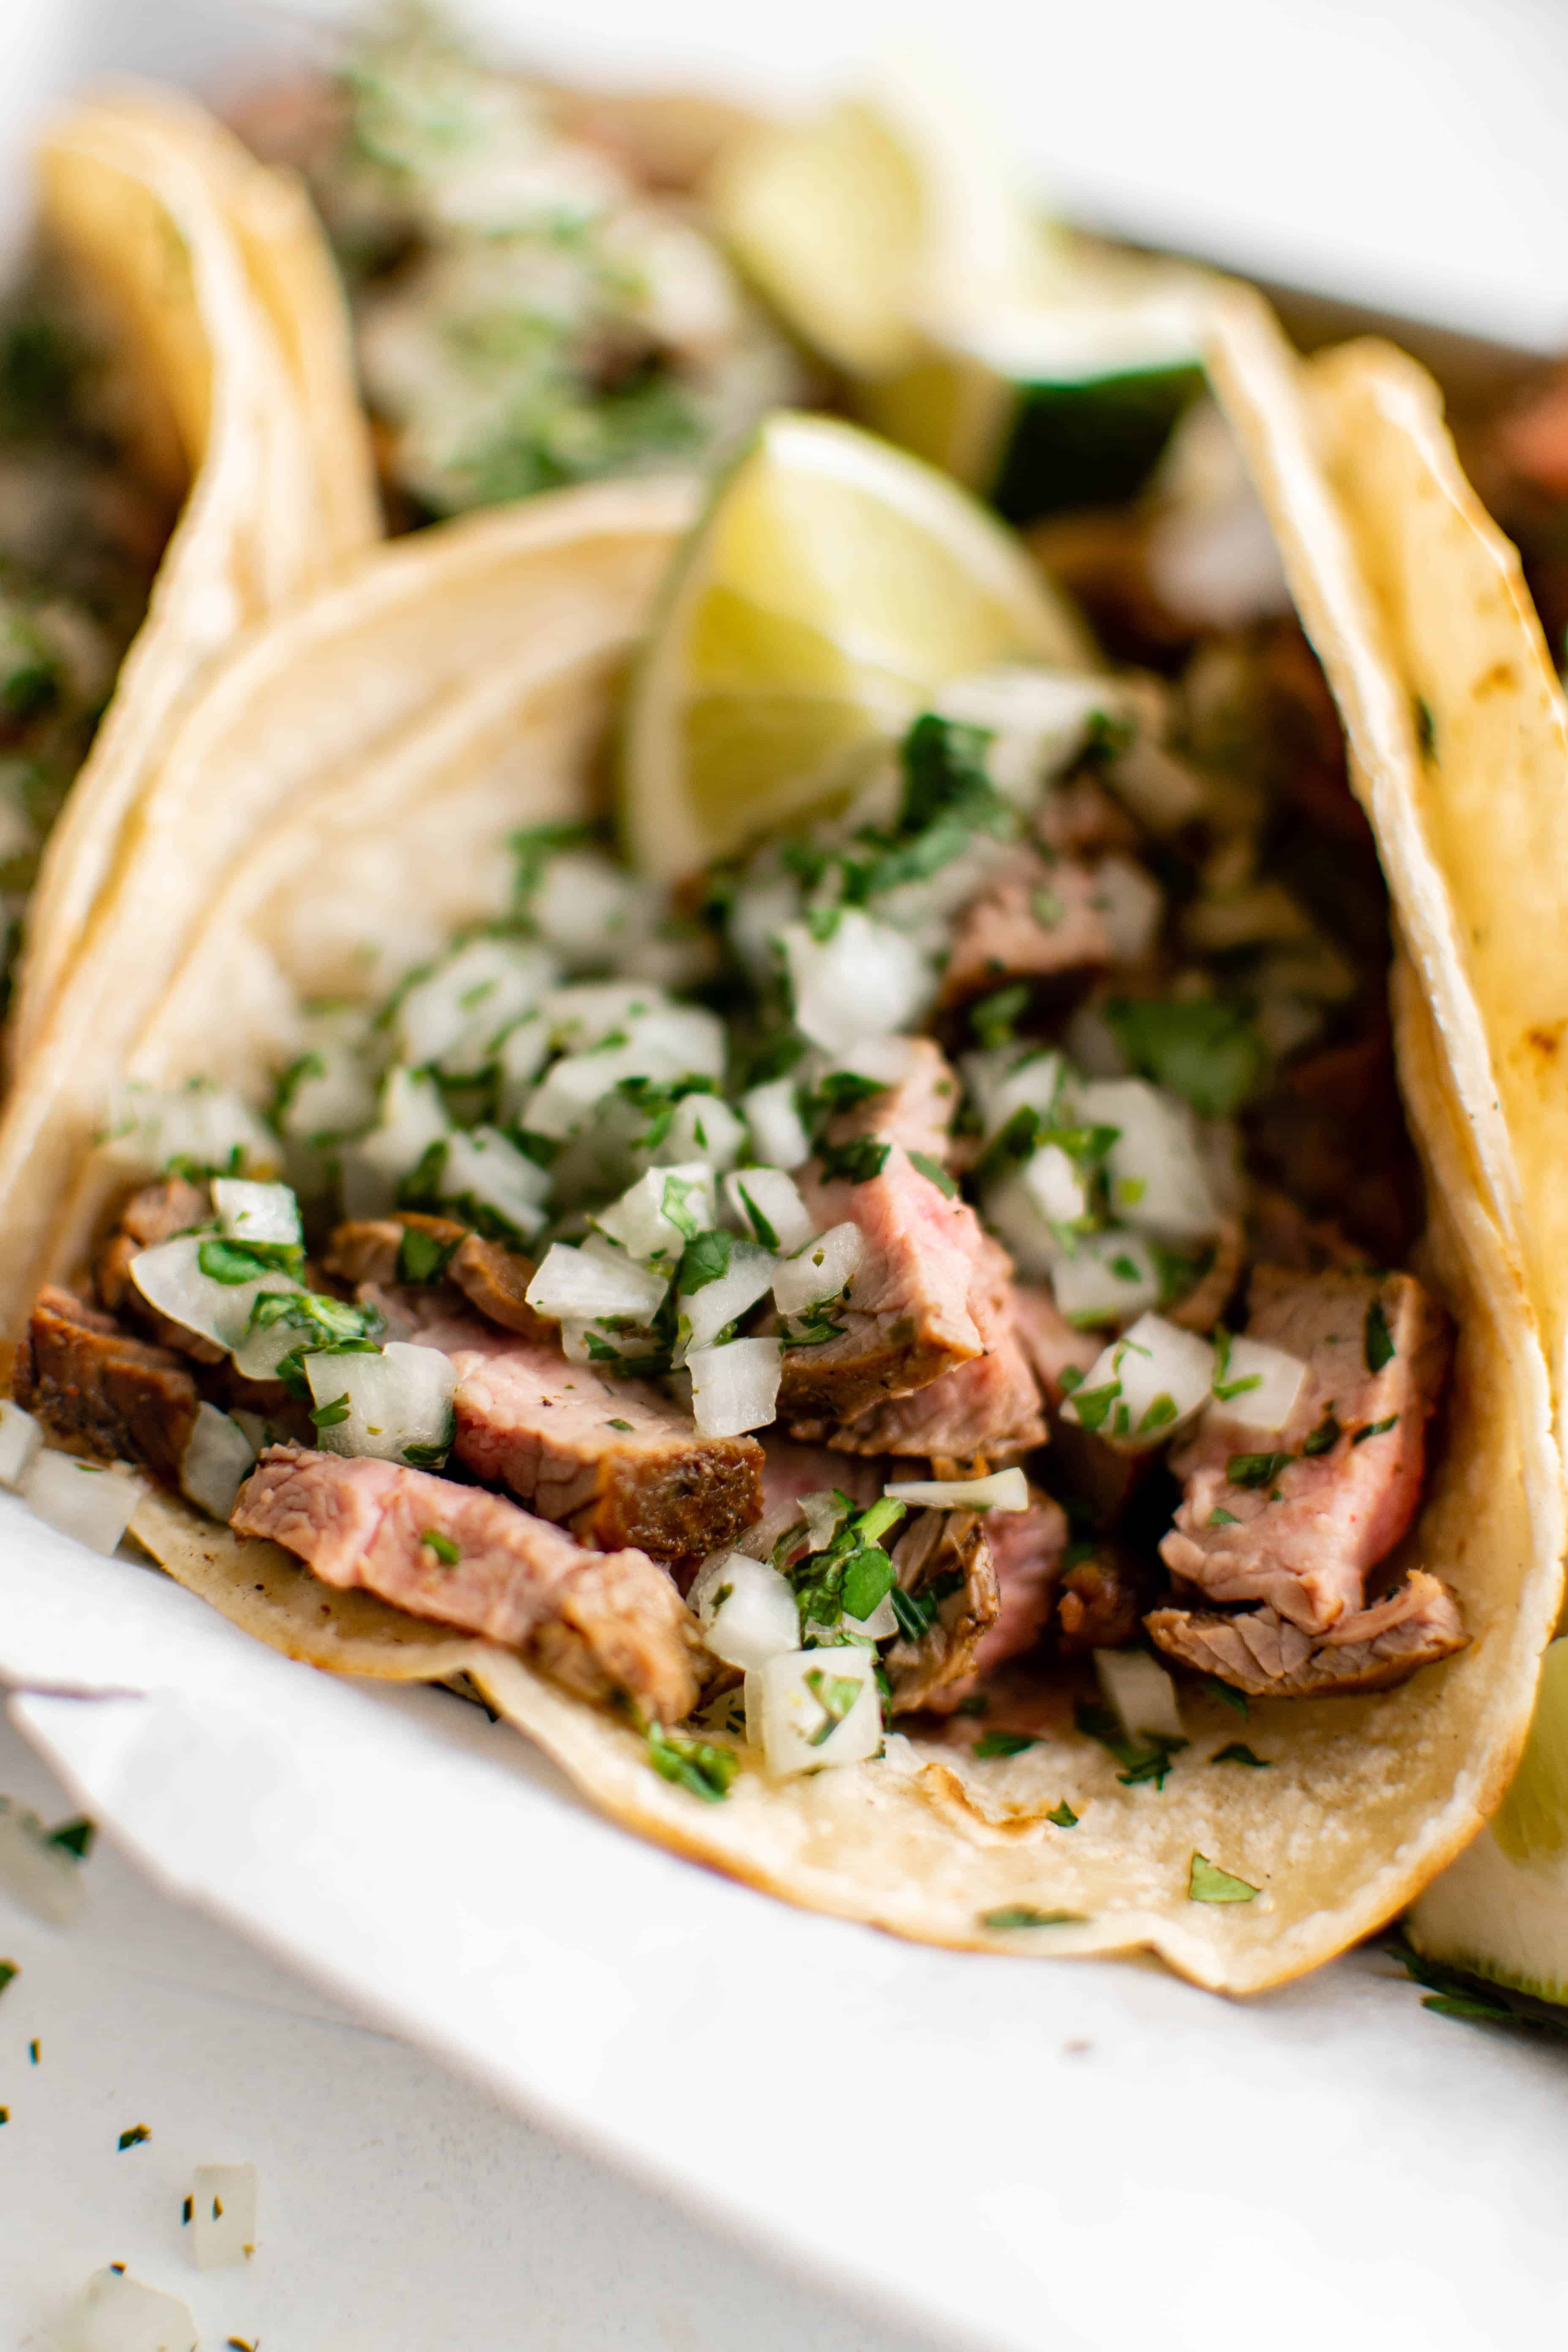 Corn tortillas filled with chopped up grilled steak and garnished with a fresh salsa made with onion, cilantro, and lime juice.